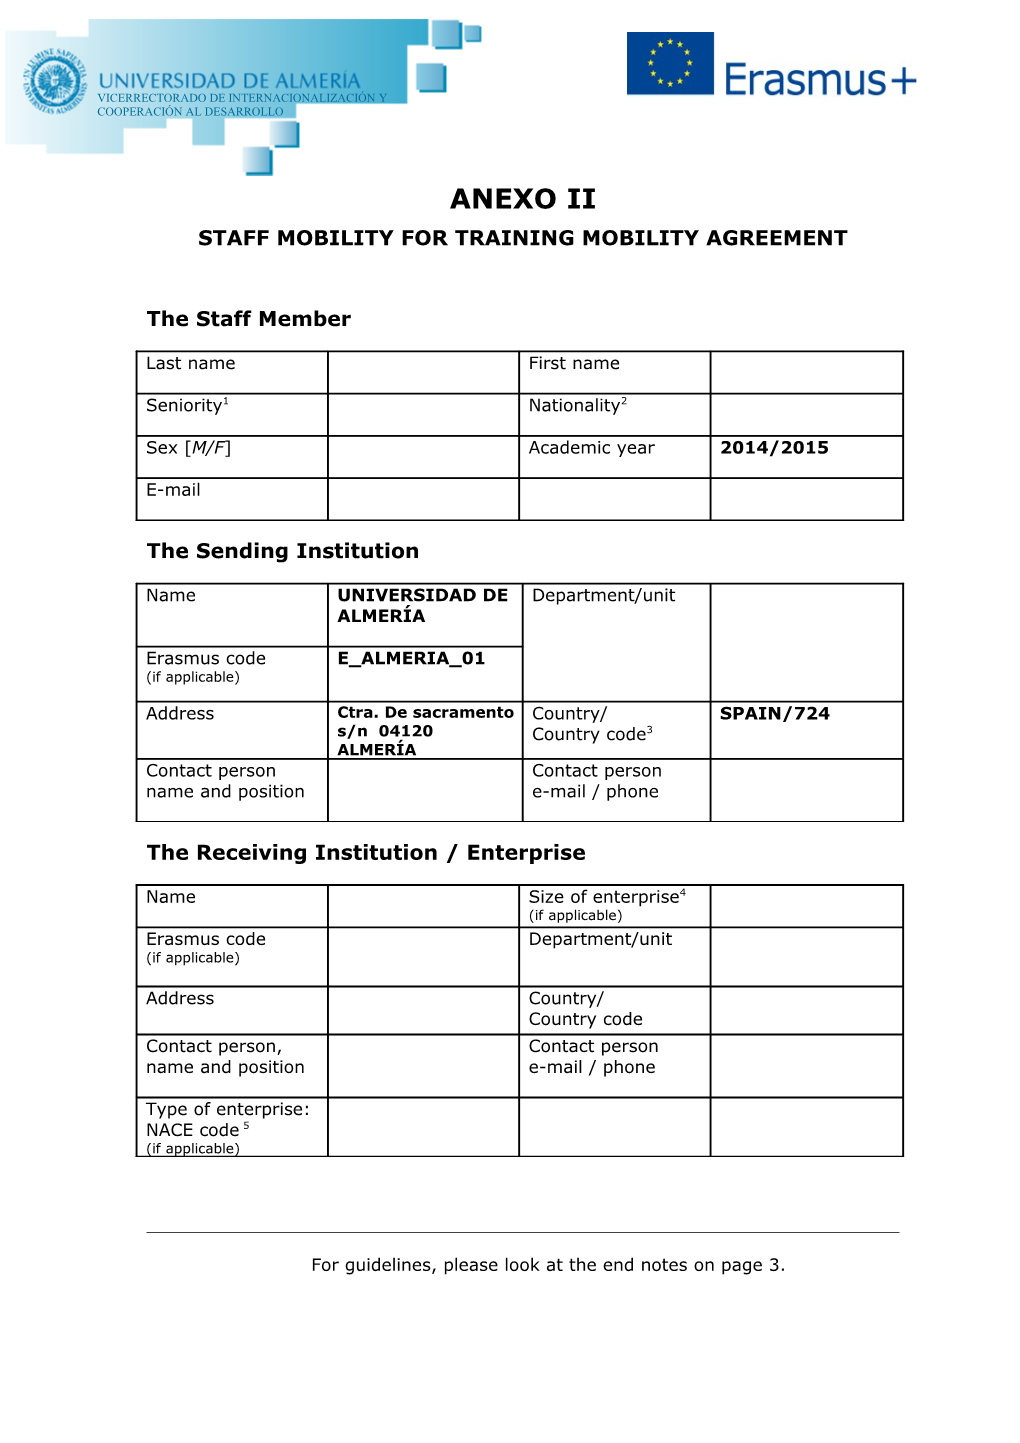 Staff Mobility for Trainingmobility Agreement